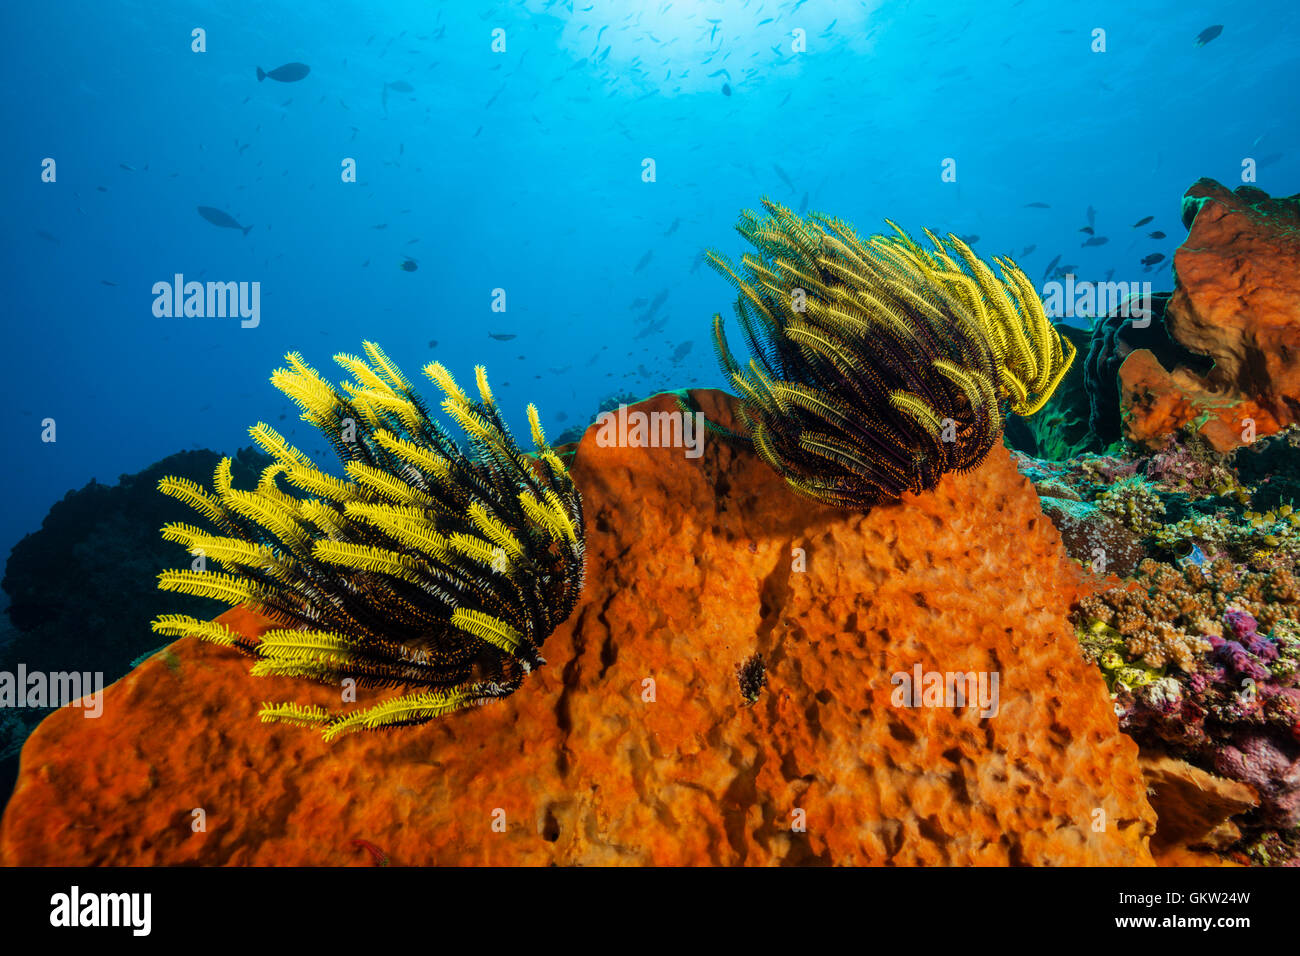 Crinoid in Coral Reef, Comanthus sp., Ambon, Moluccas, Indonesia Stock Photo